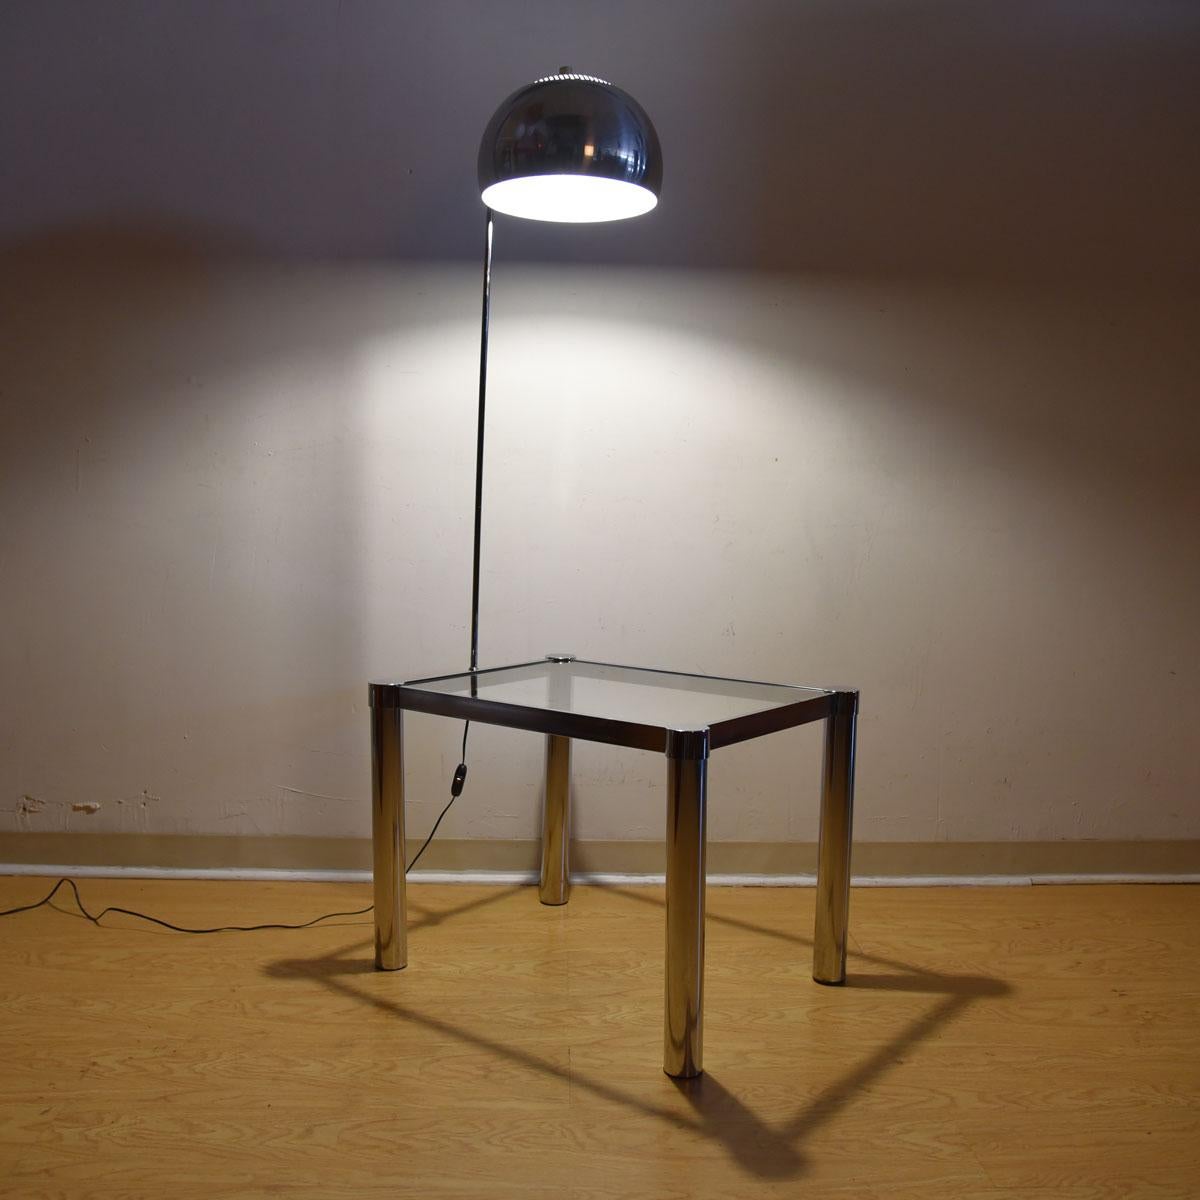 Rare Laurel midcentury Chrome Arc Lamp-Table with Glass Top

Additional information:
Material: Chrome, Glass
We are pleased to present this fabulous chrome table with a glass top. As if that were not enough, a chrome arc lamp is attached,